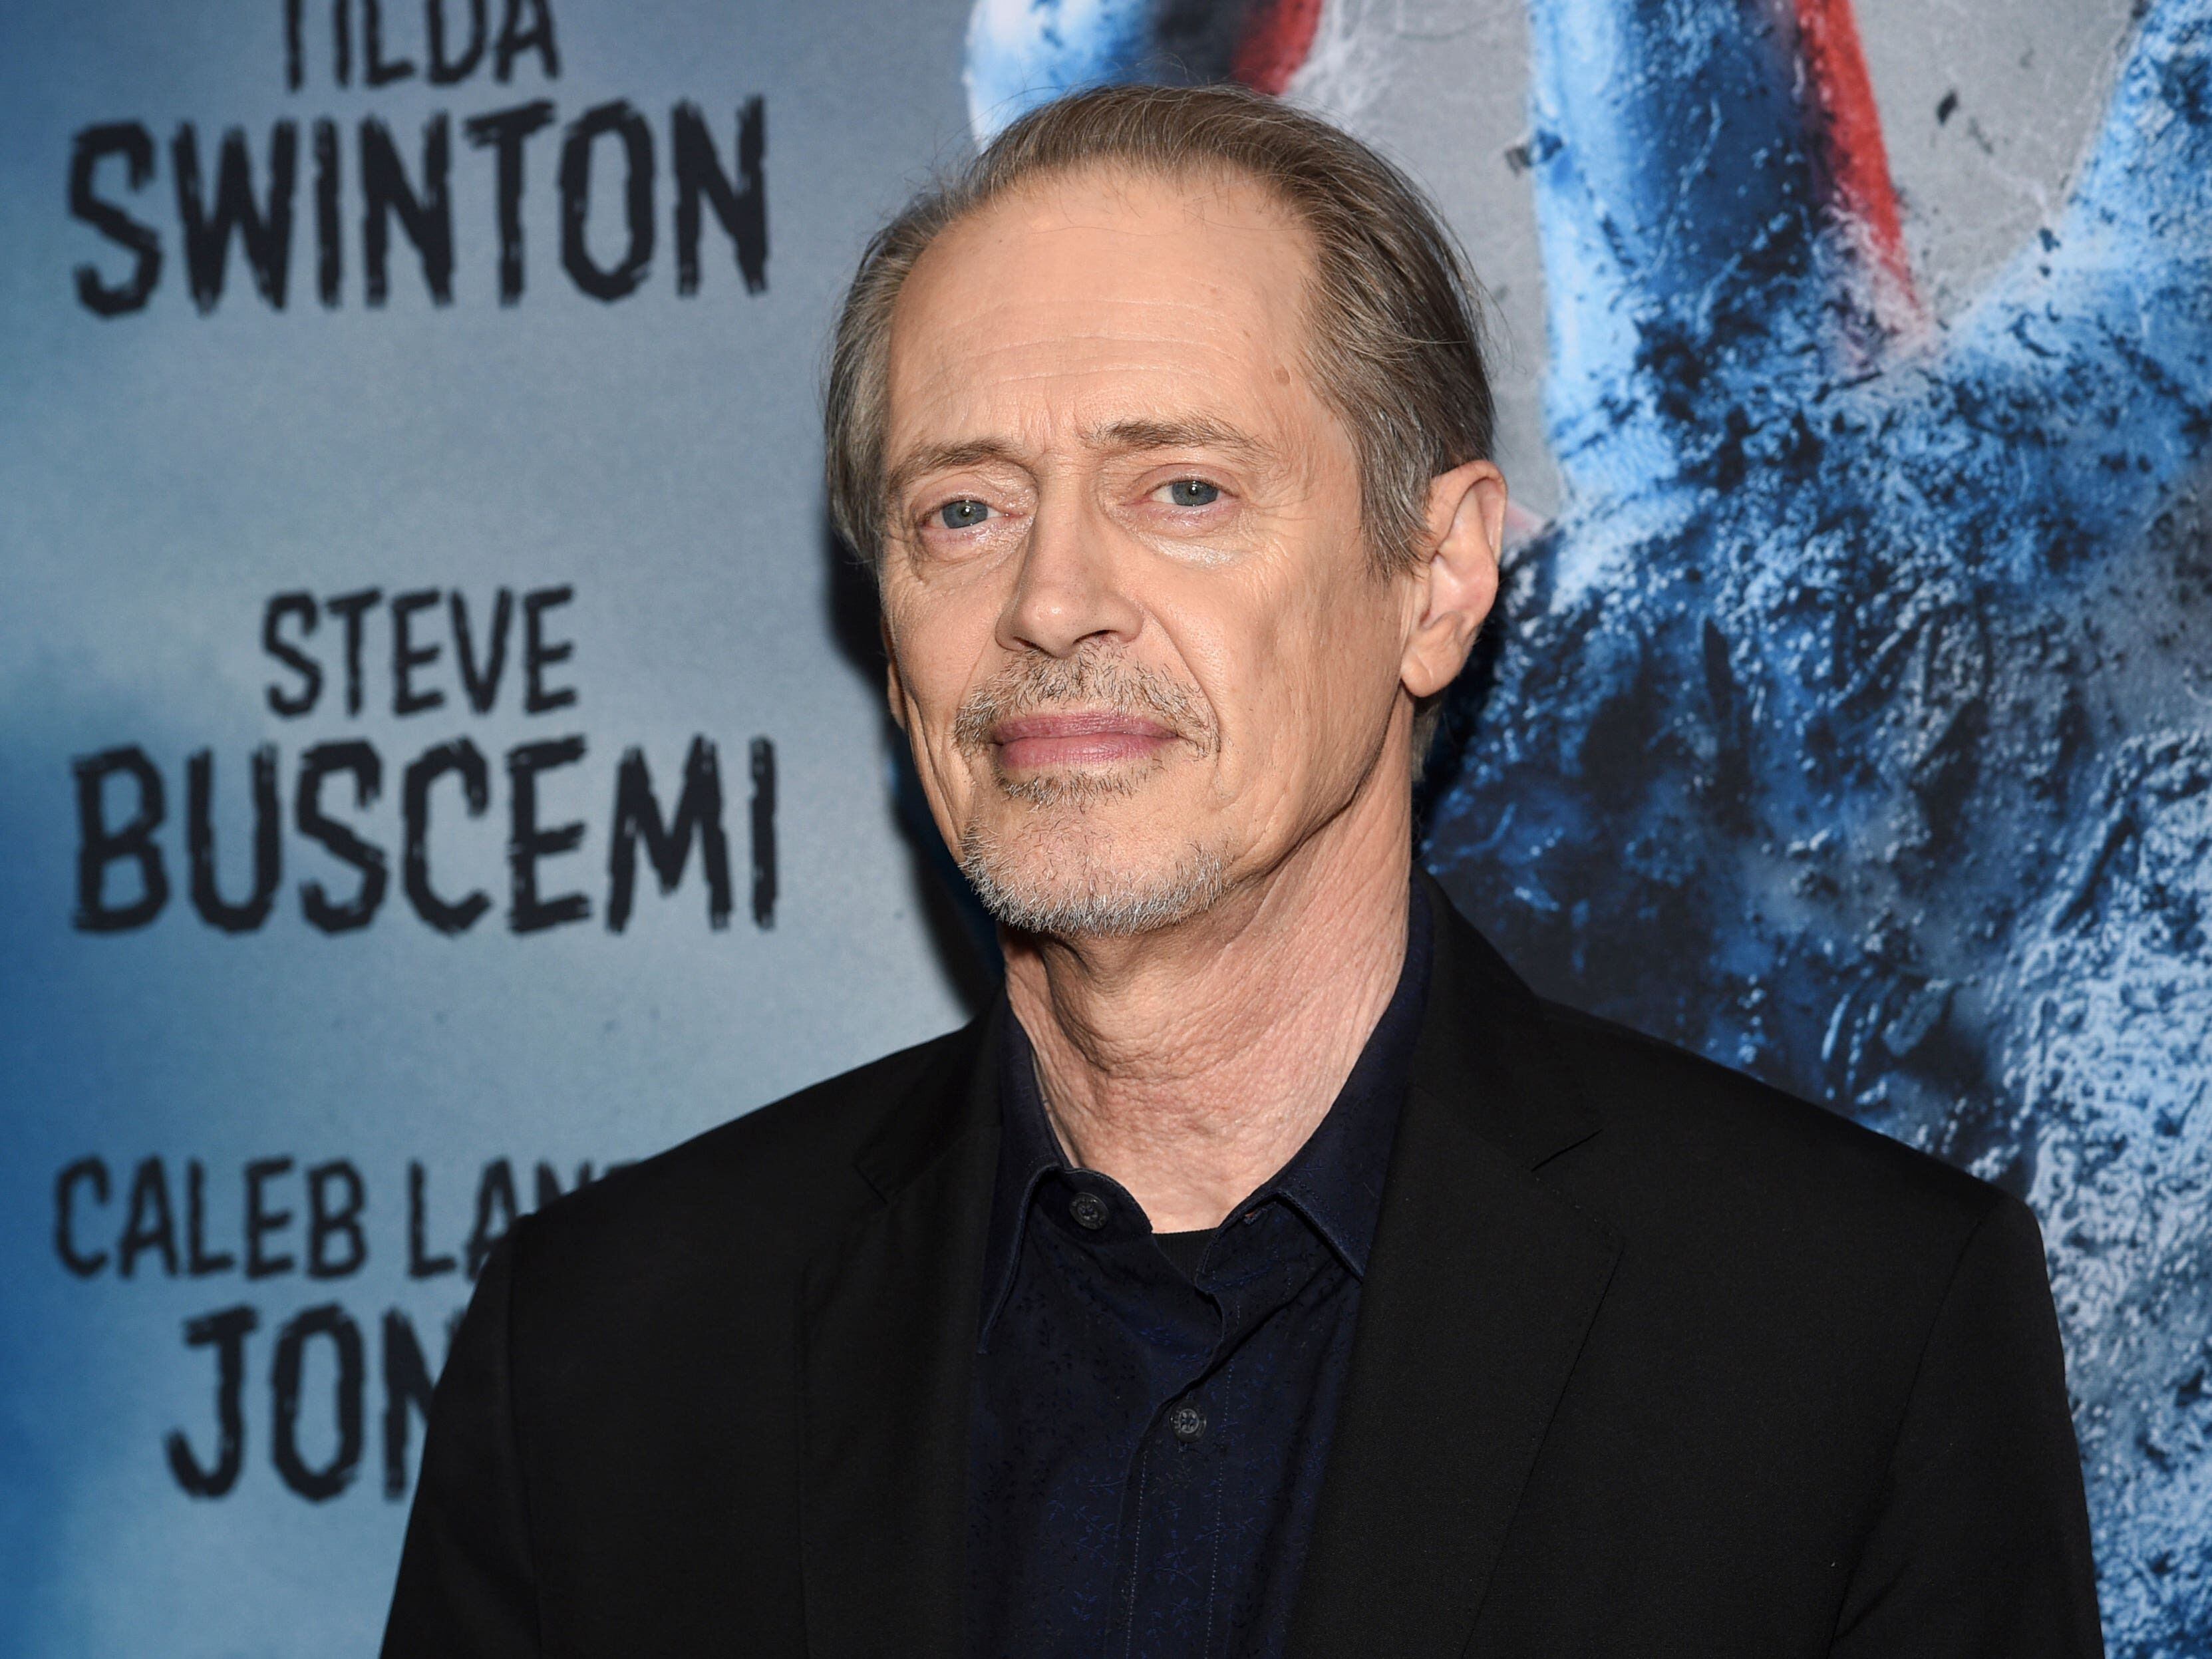 Actor Steve Buscemi punched by man in New York